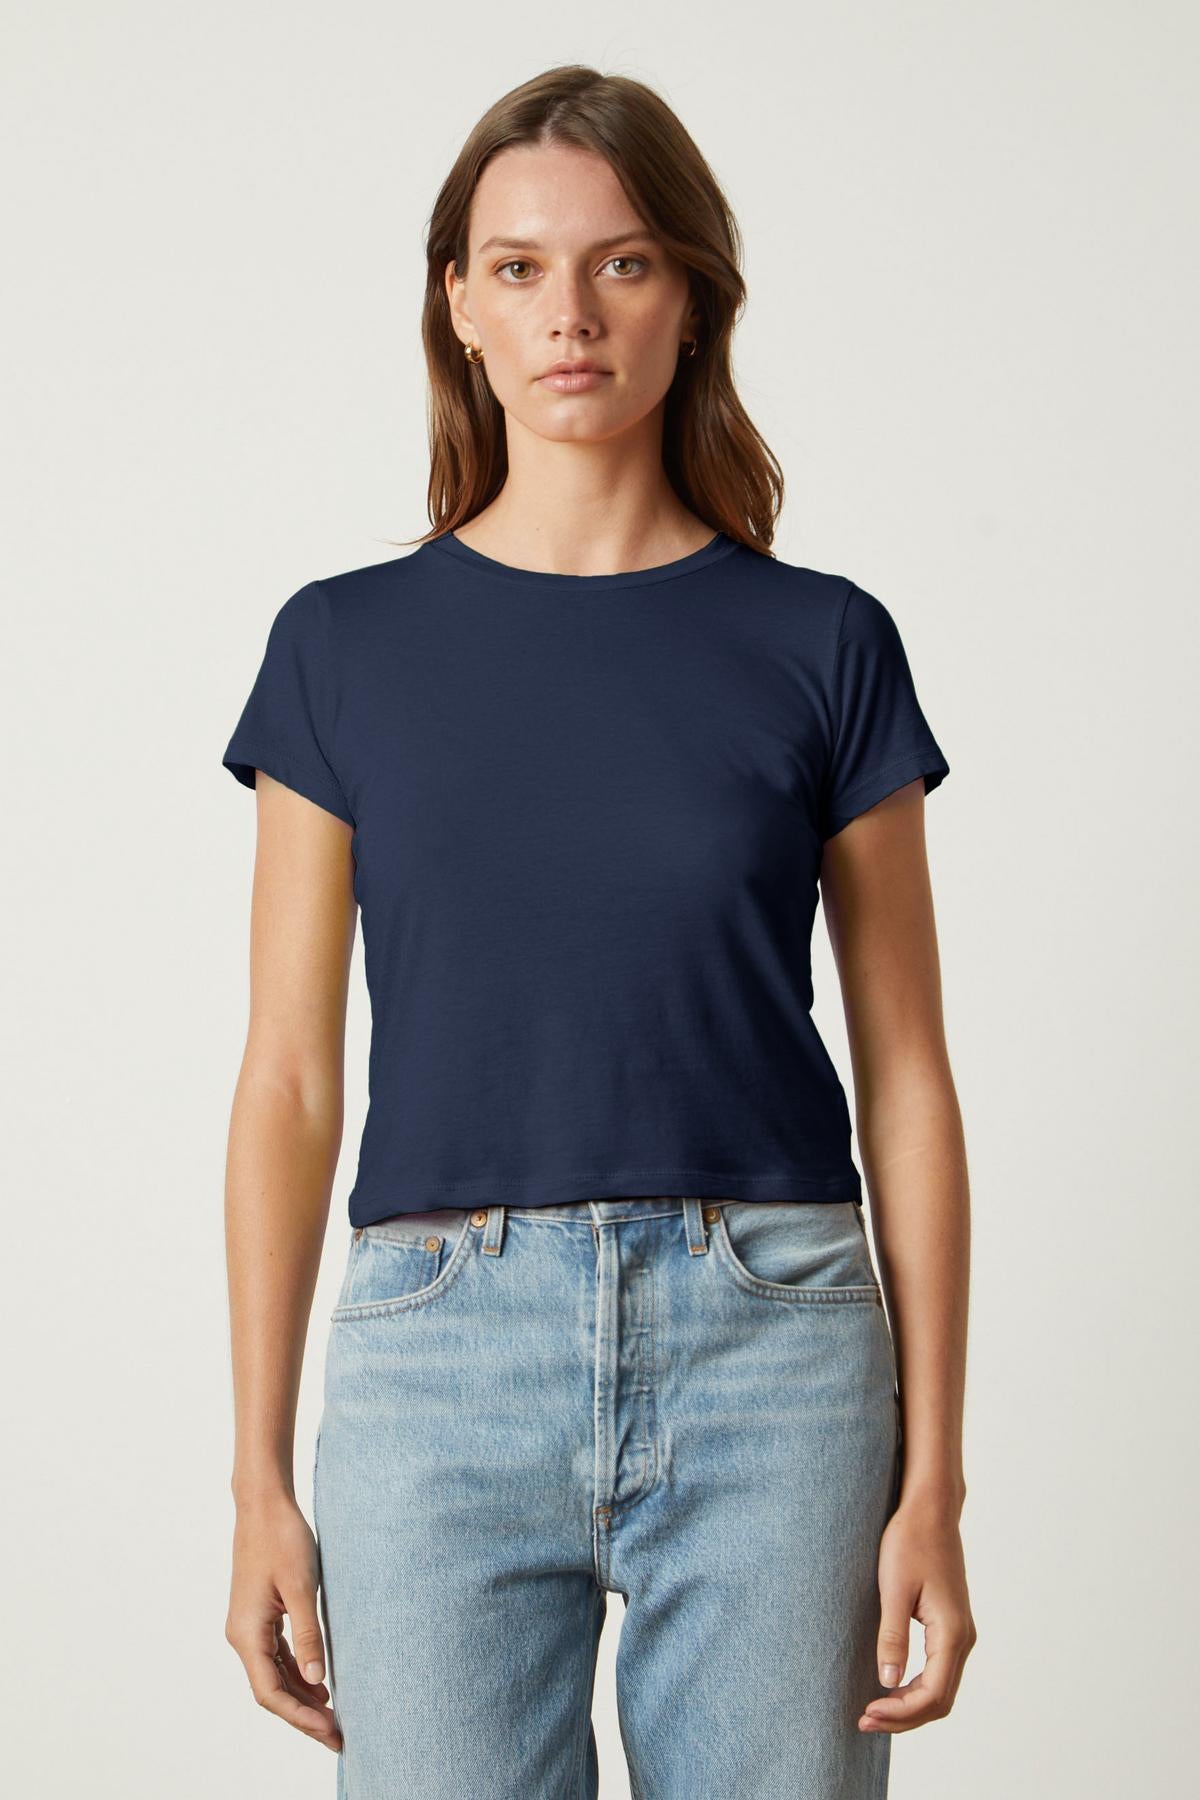   The Velvet by Graham & Spencer NINA CROPPED CREW NECK TEE in navy made of whisper cotton knit fabric. 